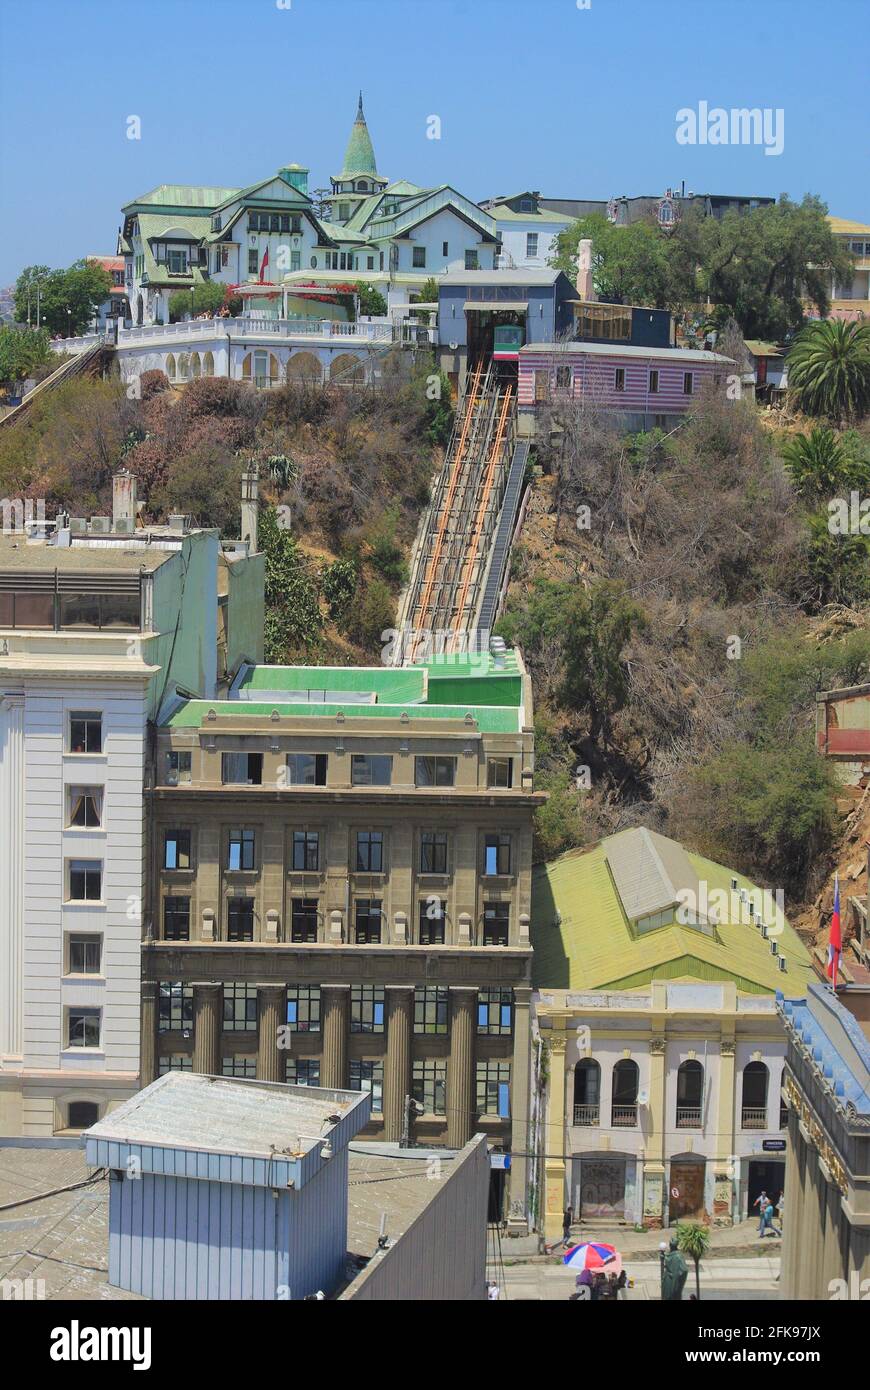 High viewpoint of the Palacio Baburizza museo de bellas artes and the El Peral funicular leading up from the port area, Valparaiso, Chile, South America Stock Photo